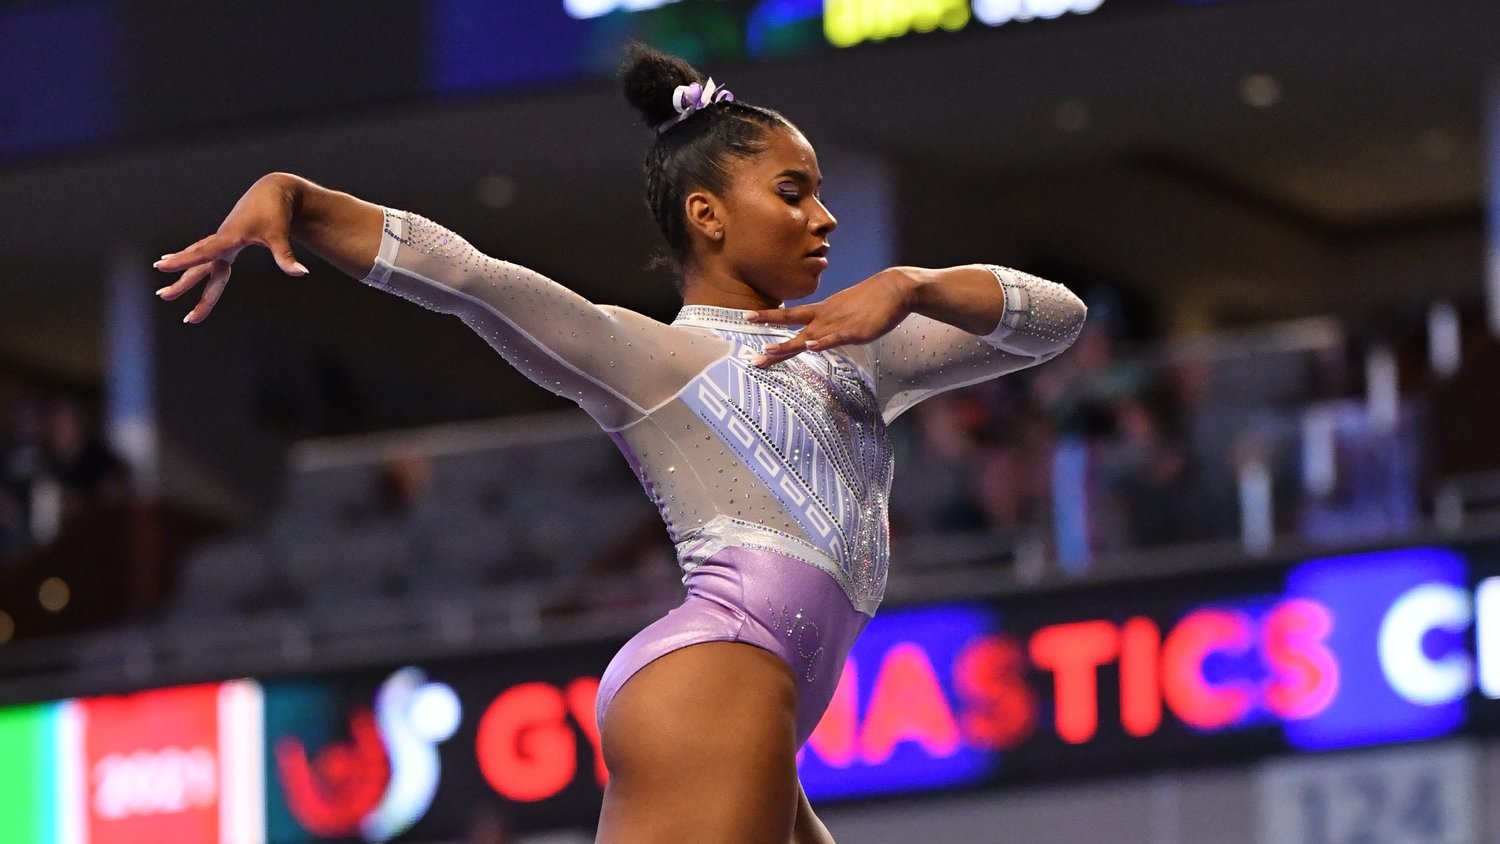 Jordan Chiles, a Prairie High School graduate, placed third in the all-around category during the national gymnastics championship. The 20-year-old trains with Olympic gold medalist Simone Biles in Houston, Texas.